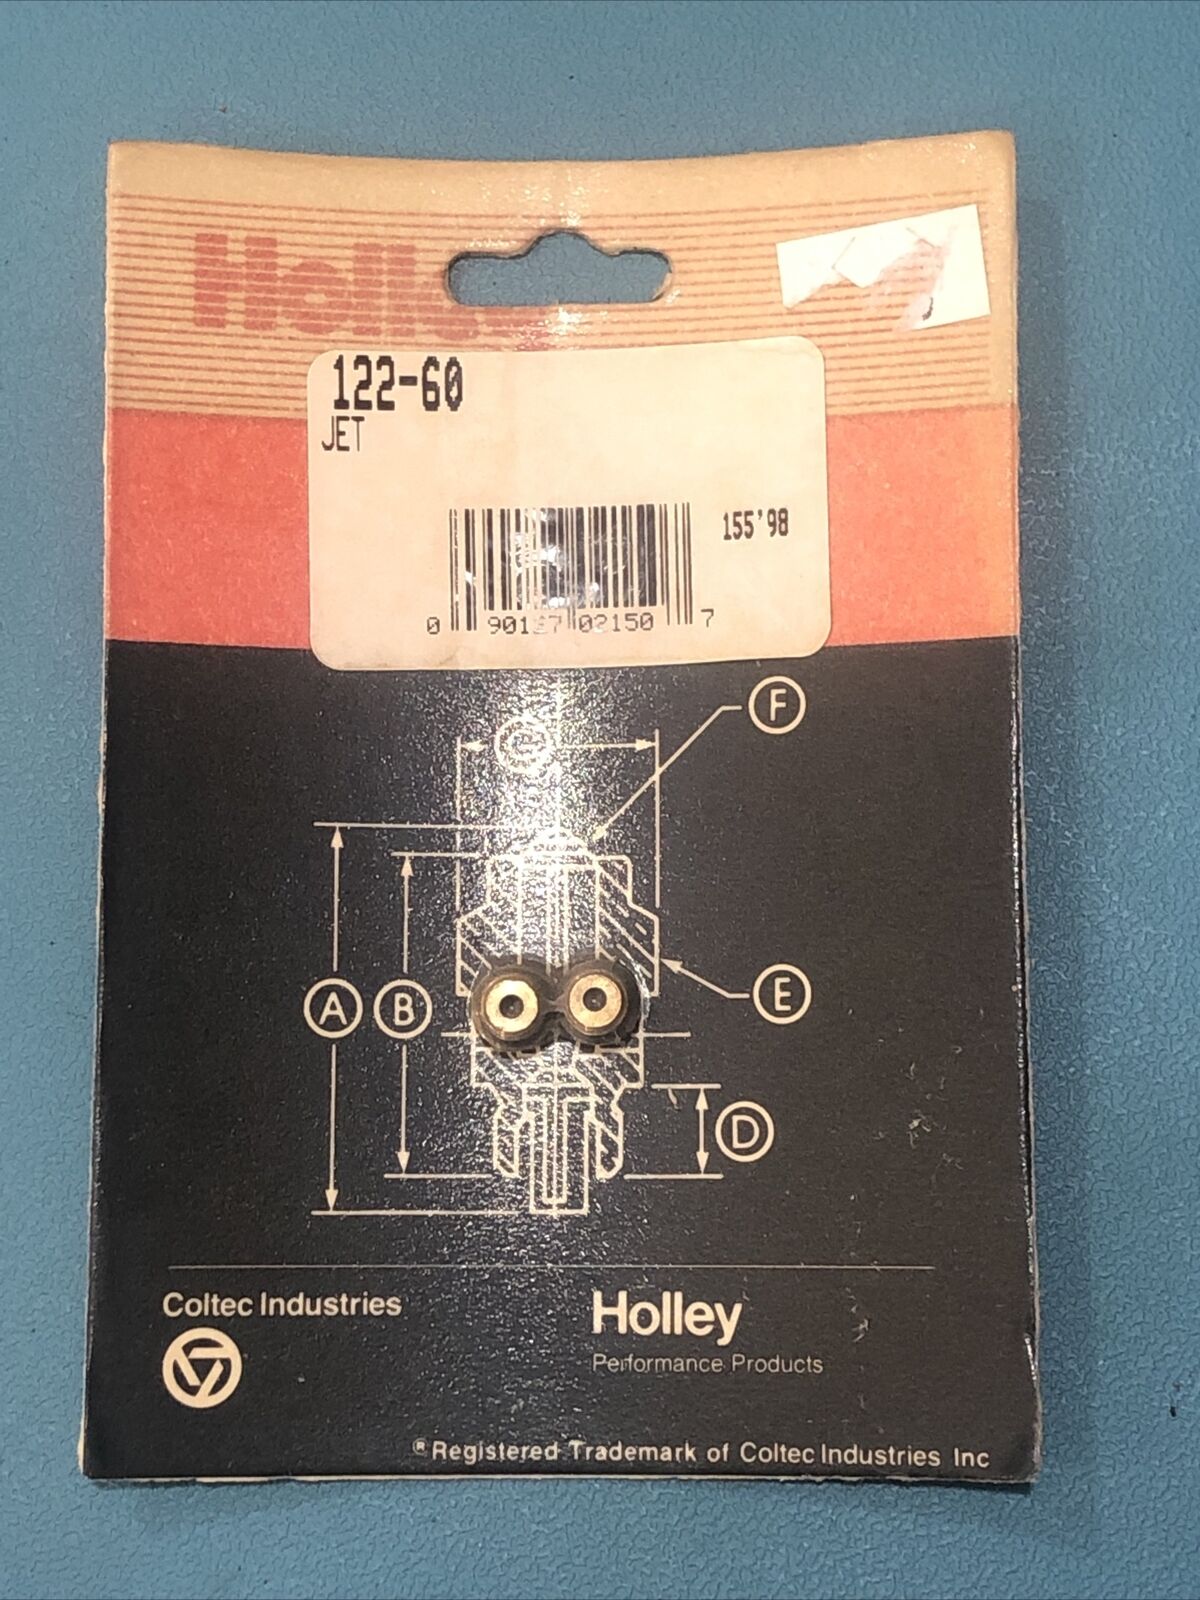 Holley 122-60 Jet